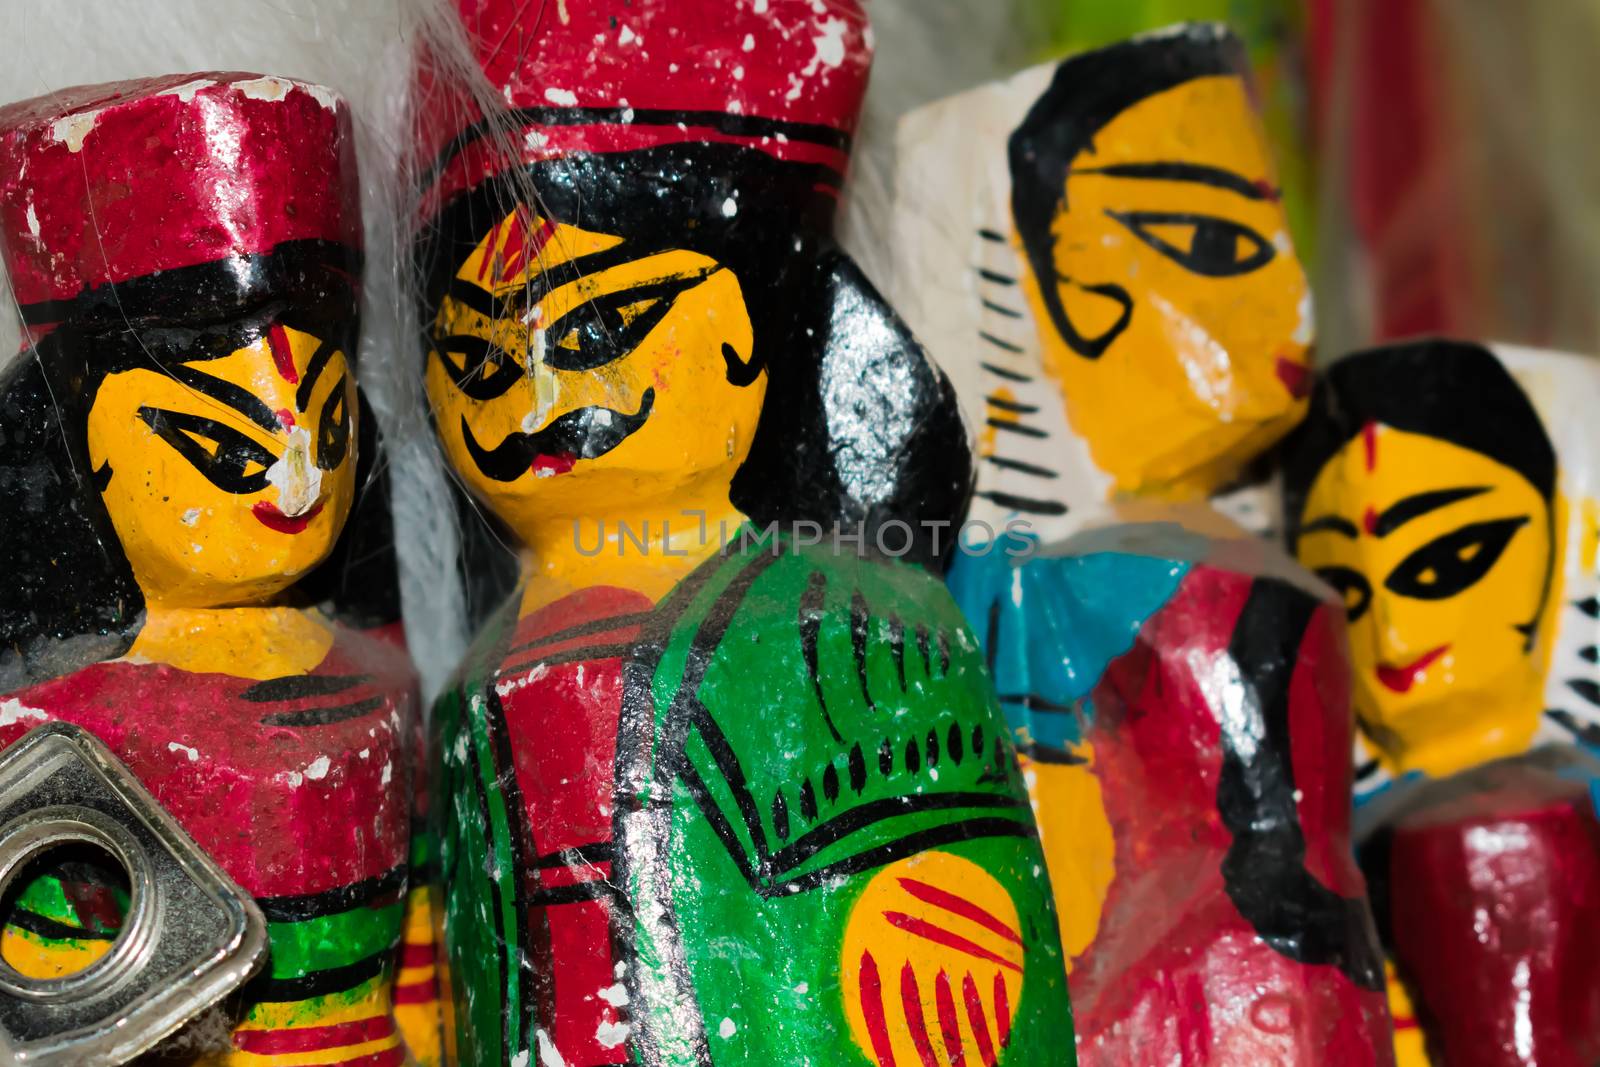 Dolls toys handmade at the exhibition of folk arts by sudiptabhowmick